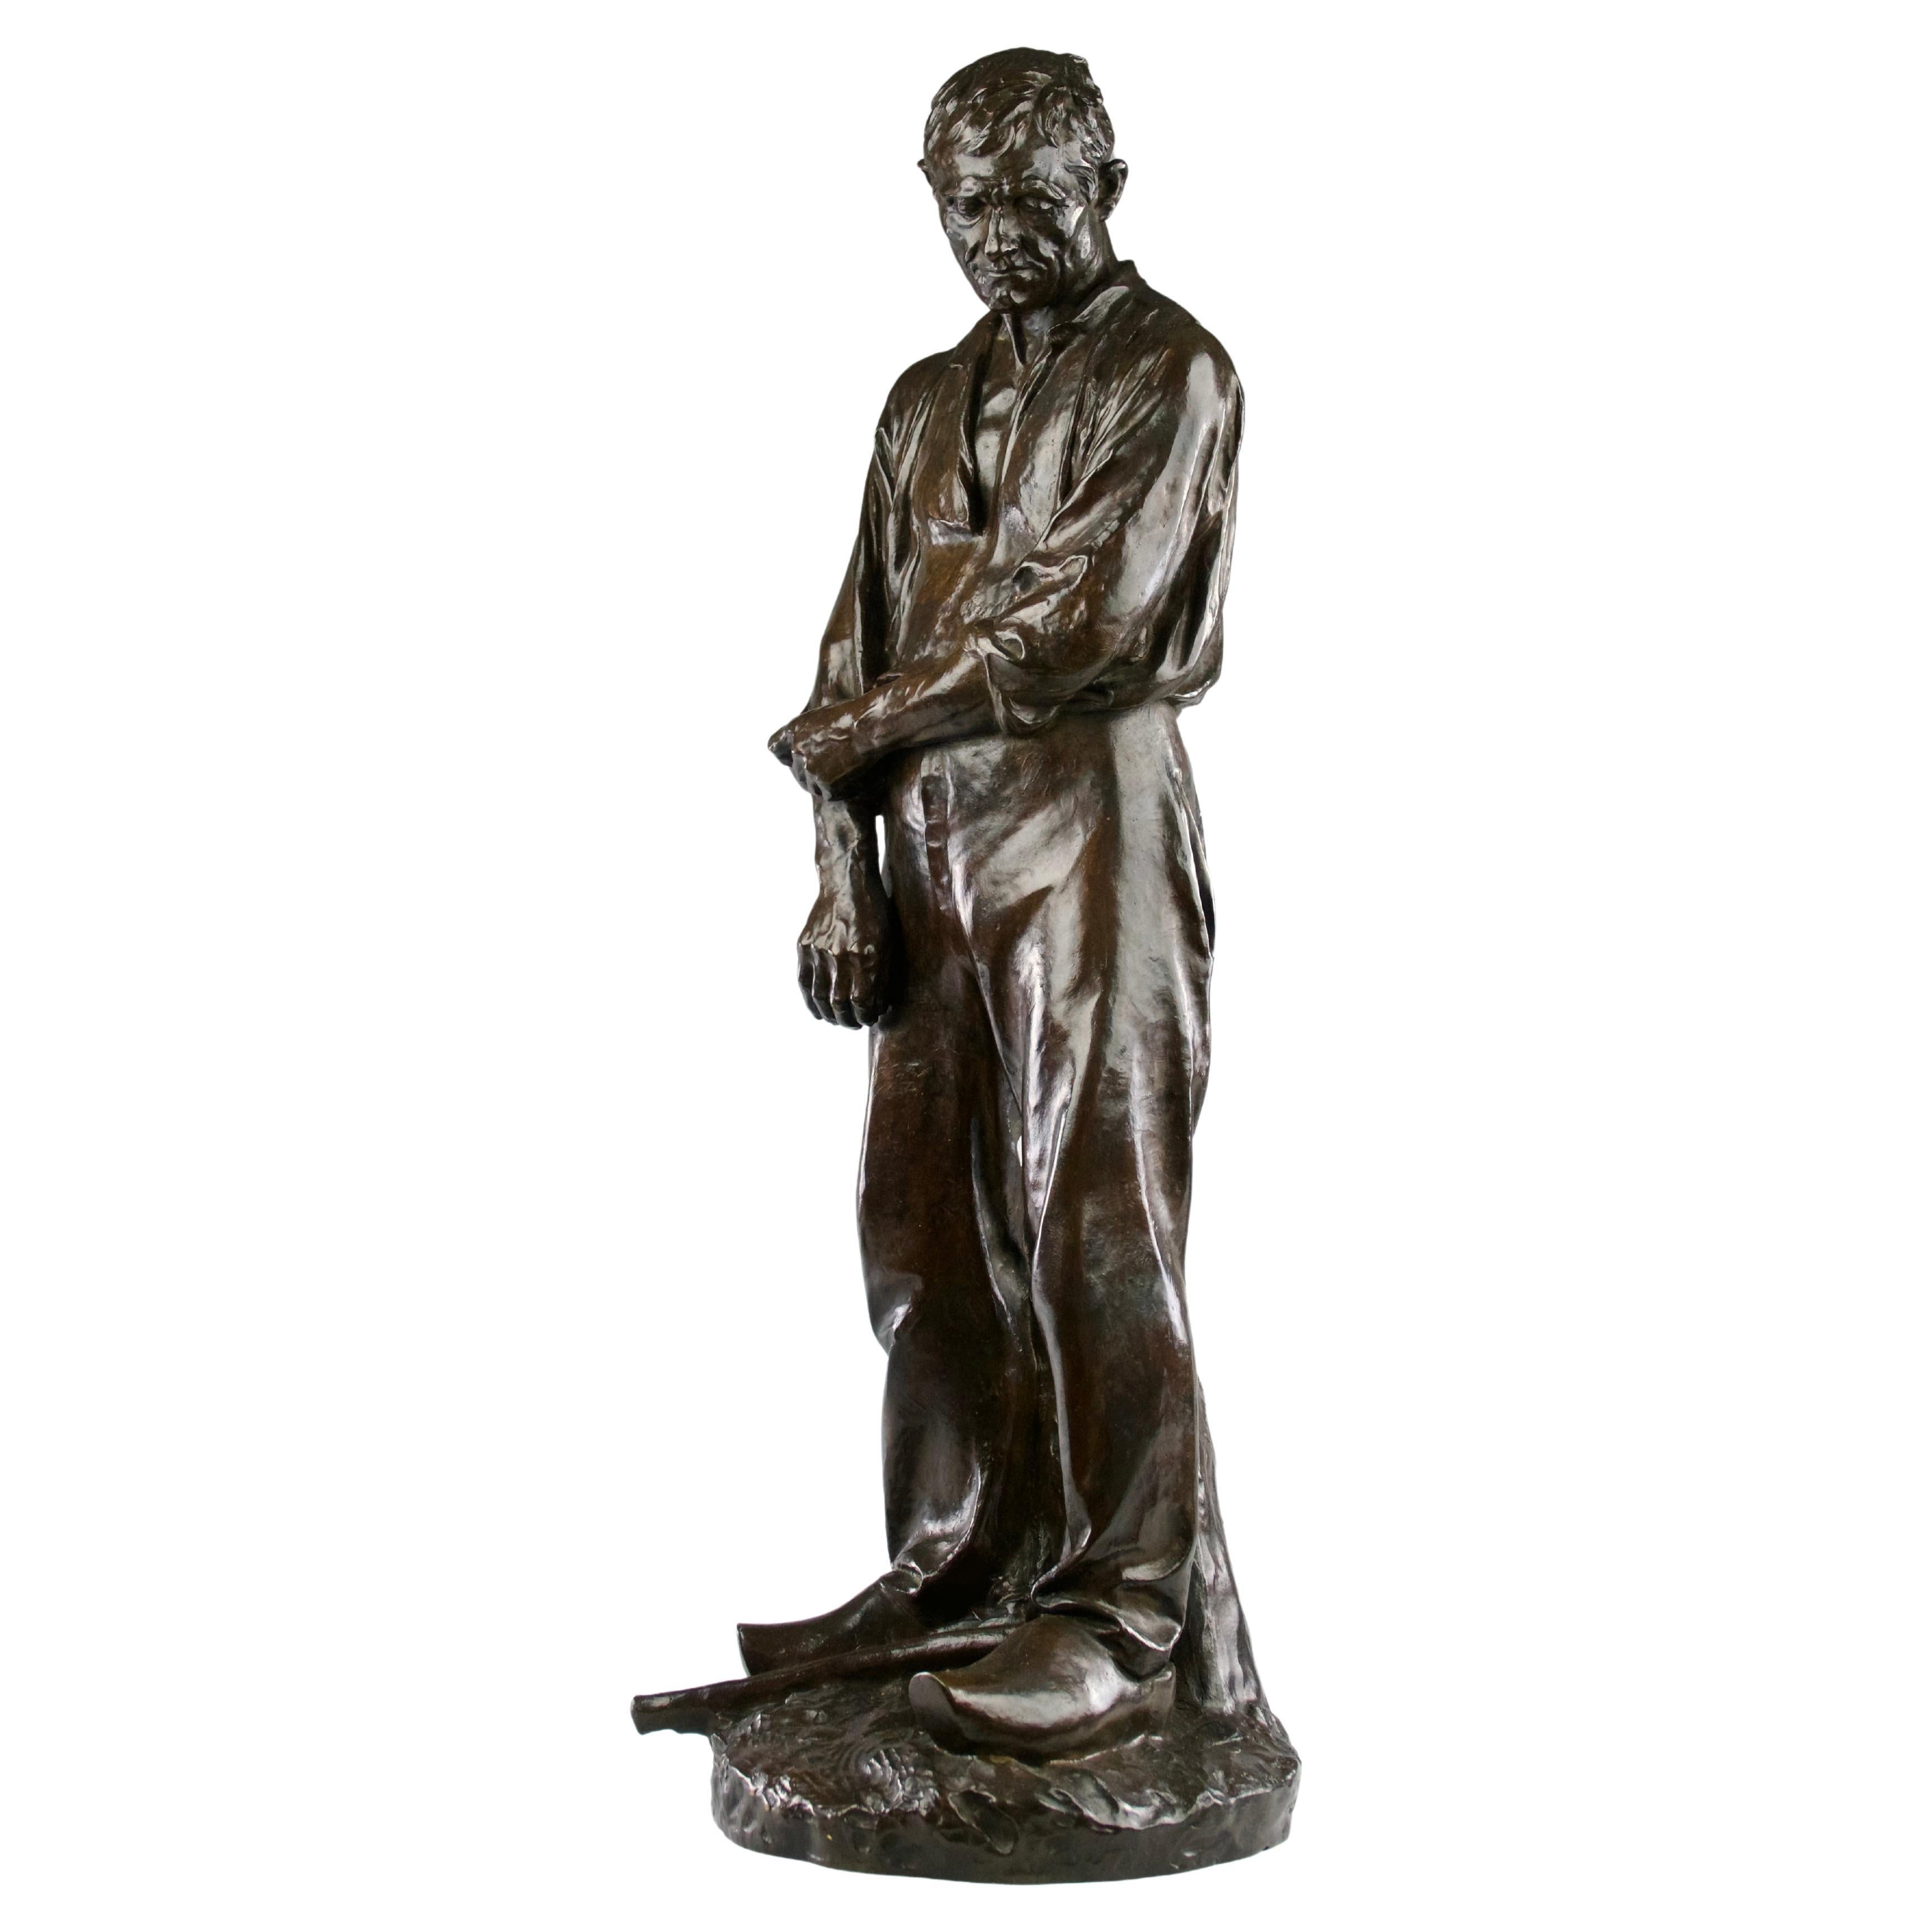 Aimé-Jules Dalou / Susse Frères Foundry, "the Large Lumberjack-Farmer"  Sculpture For Sale at 1stDibs